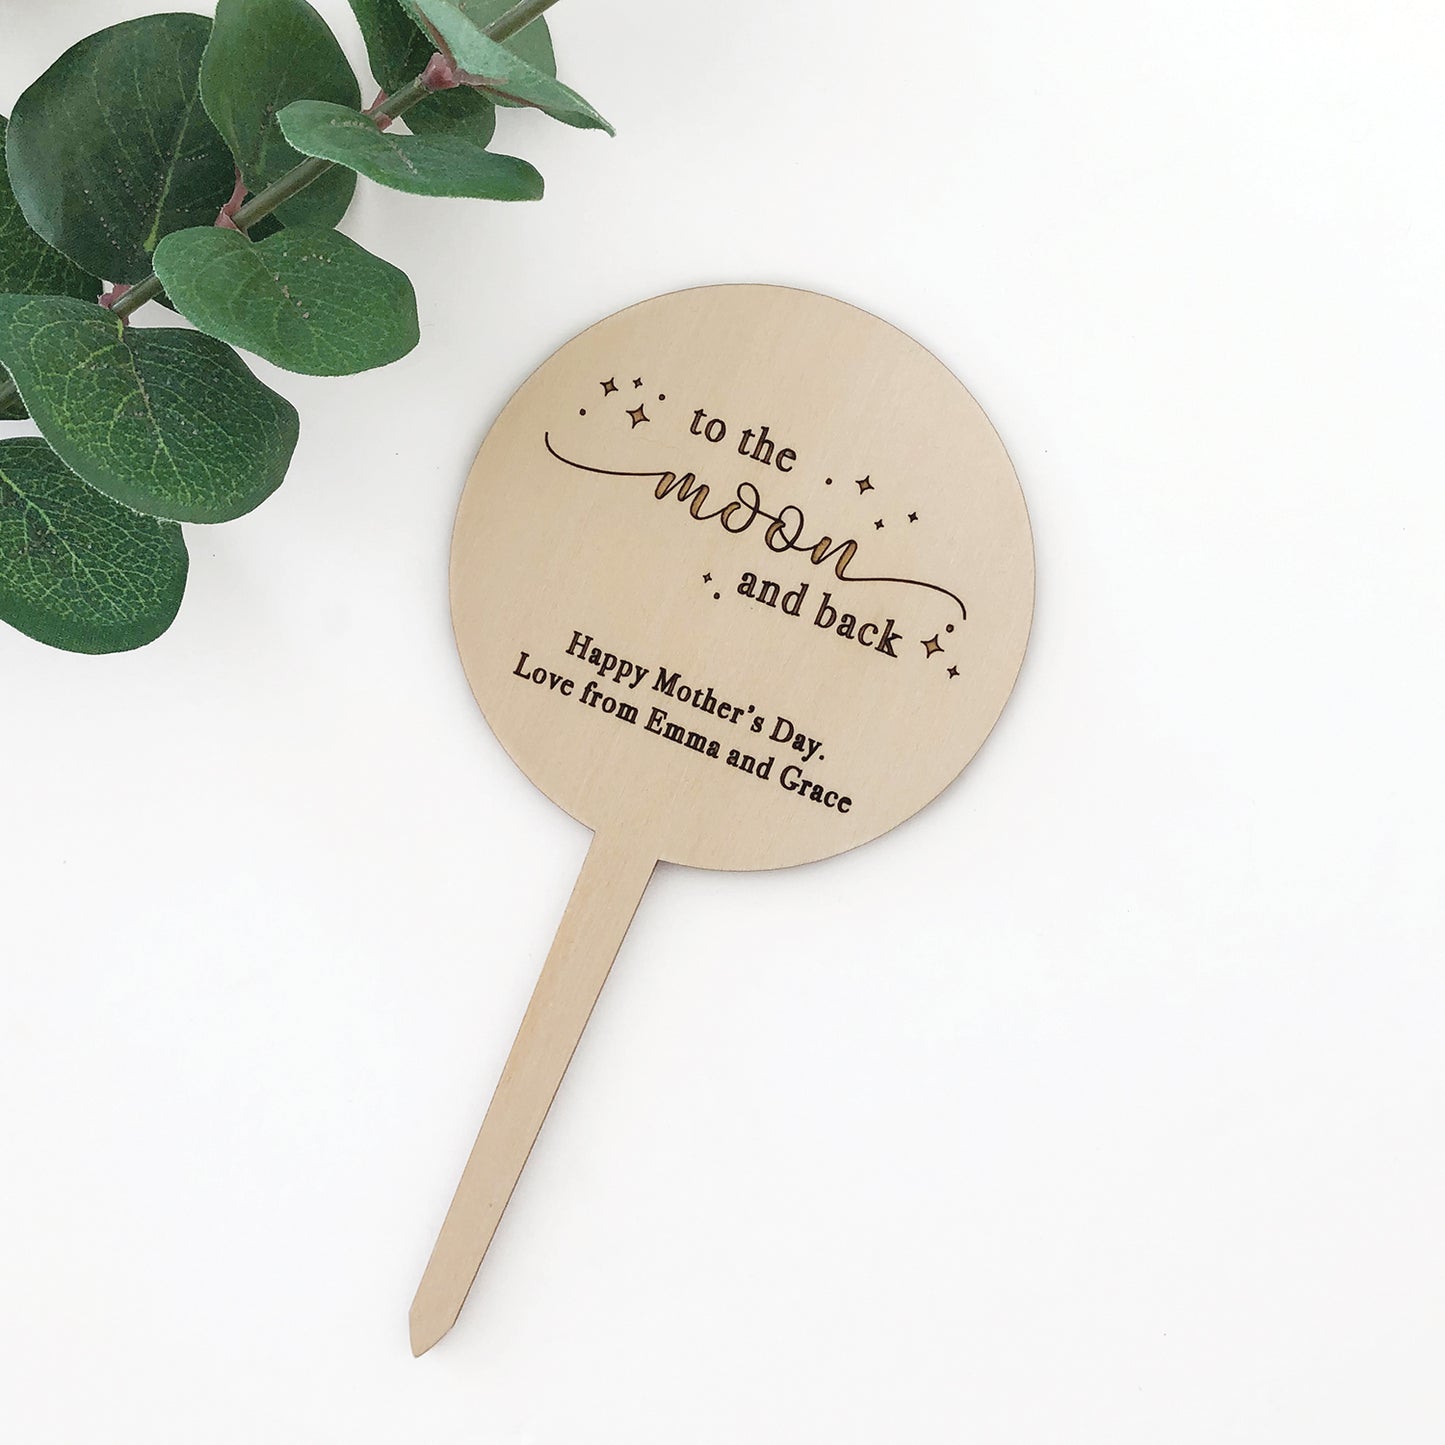 To the Moon and Back Planter Stick